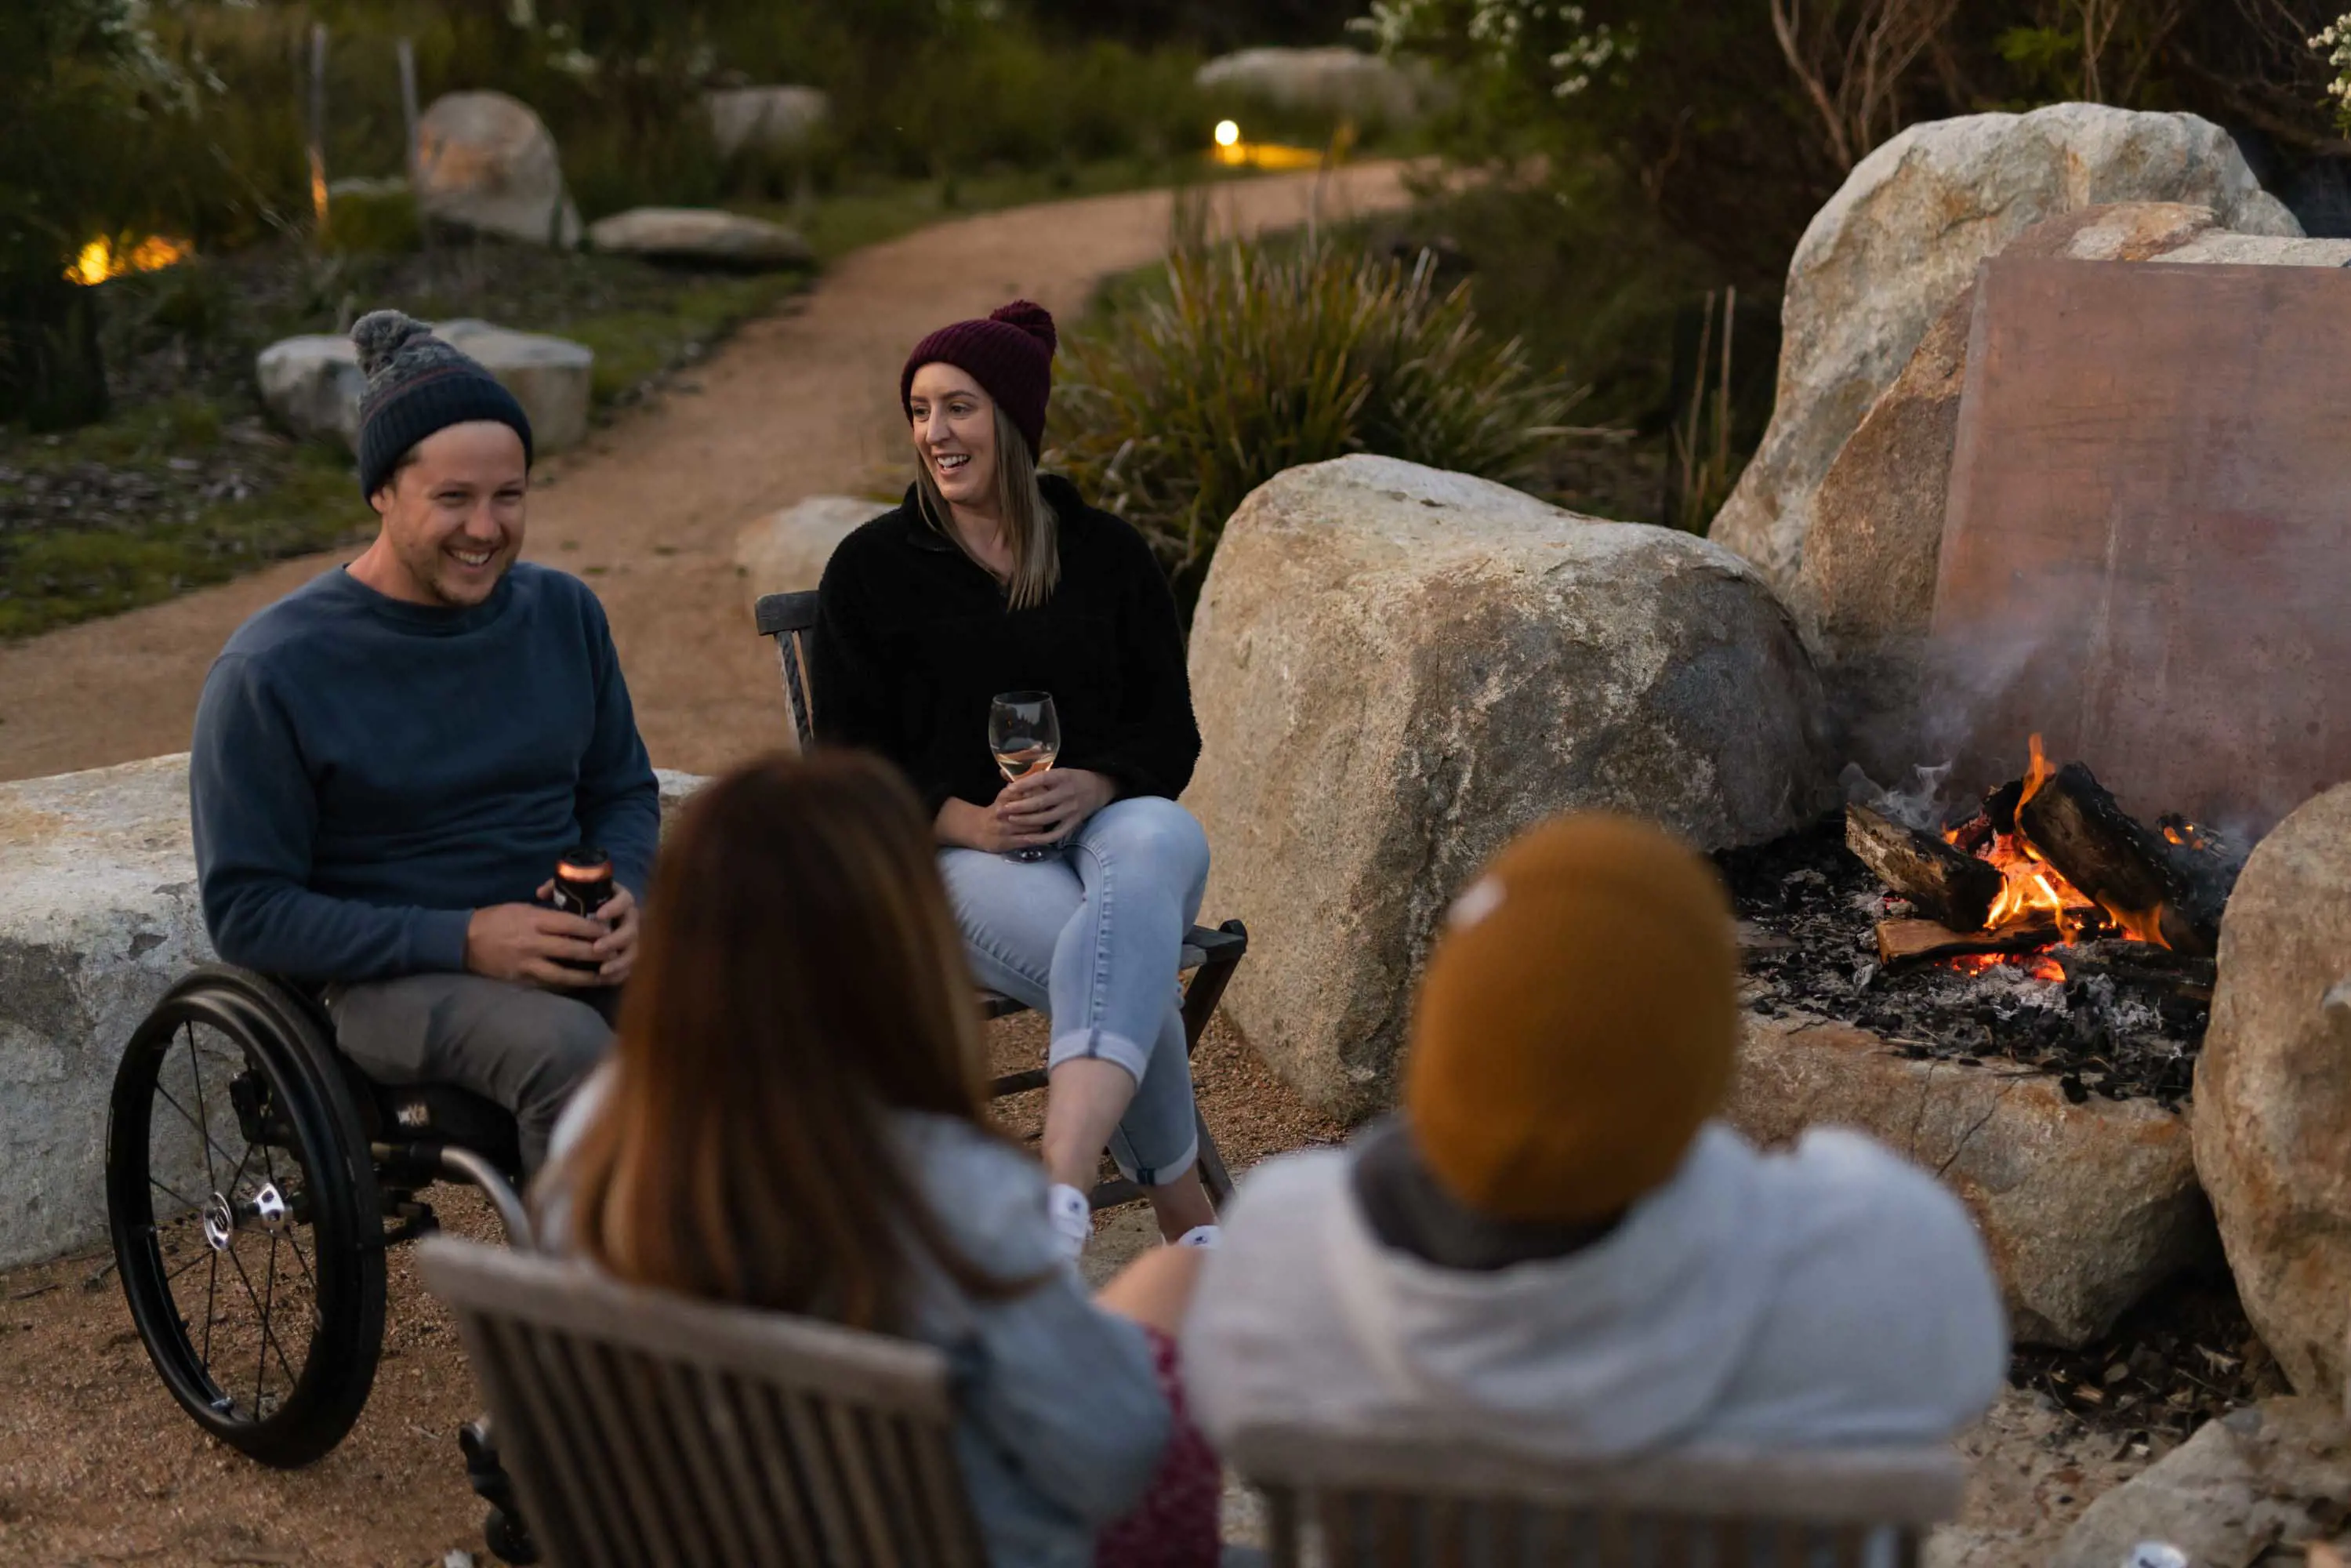 A group of people wearing beanies gather around a campfire wearing beanies and chatting.